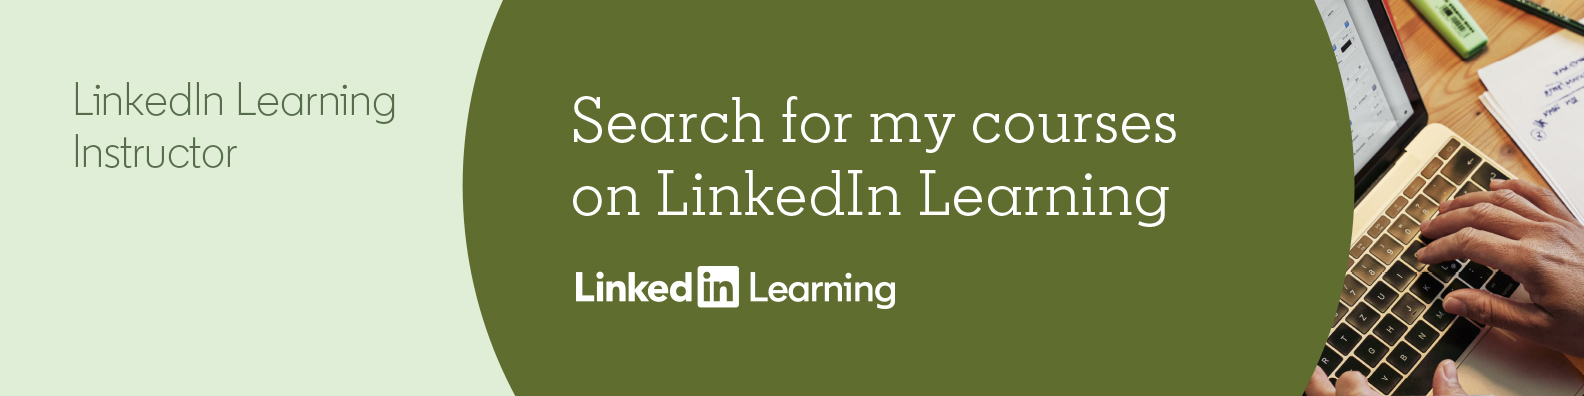 Search for my courses on LinkedIn Learning